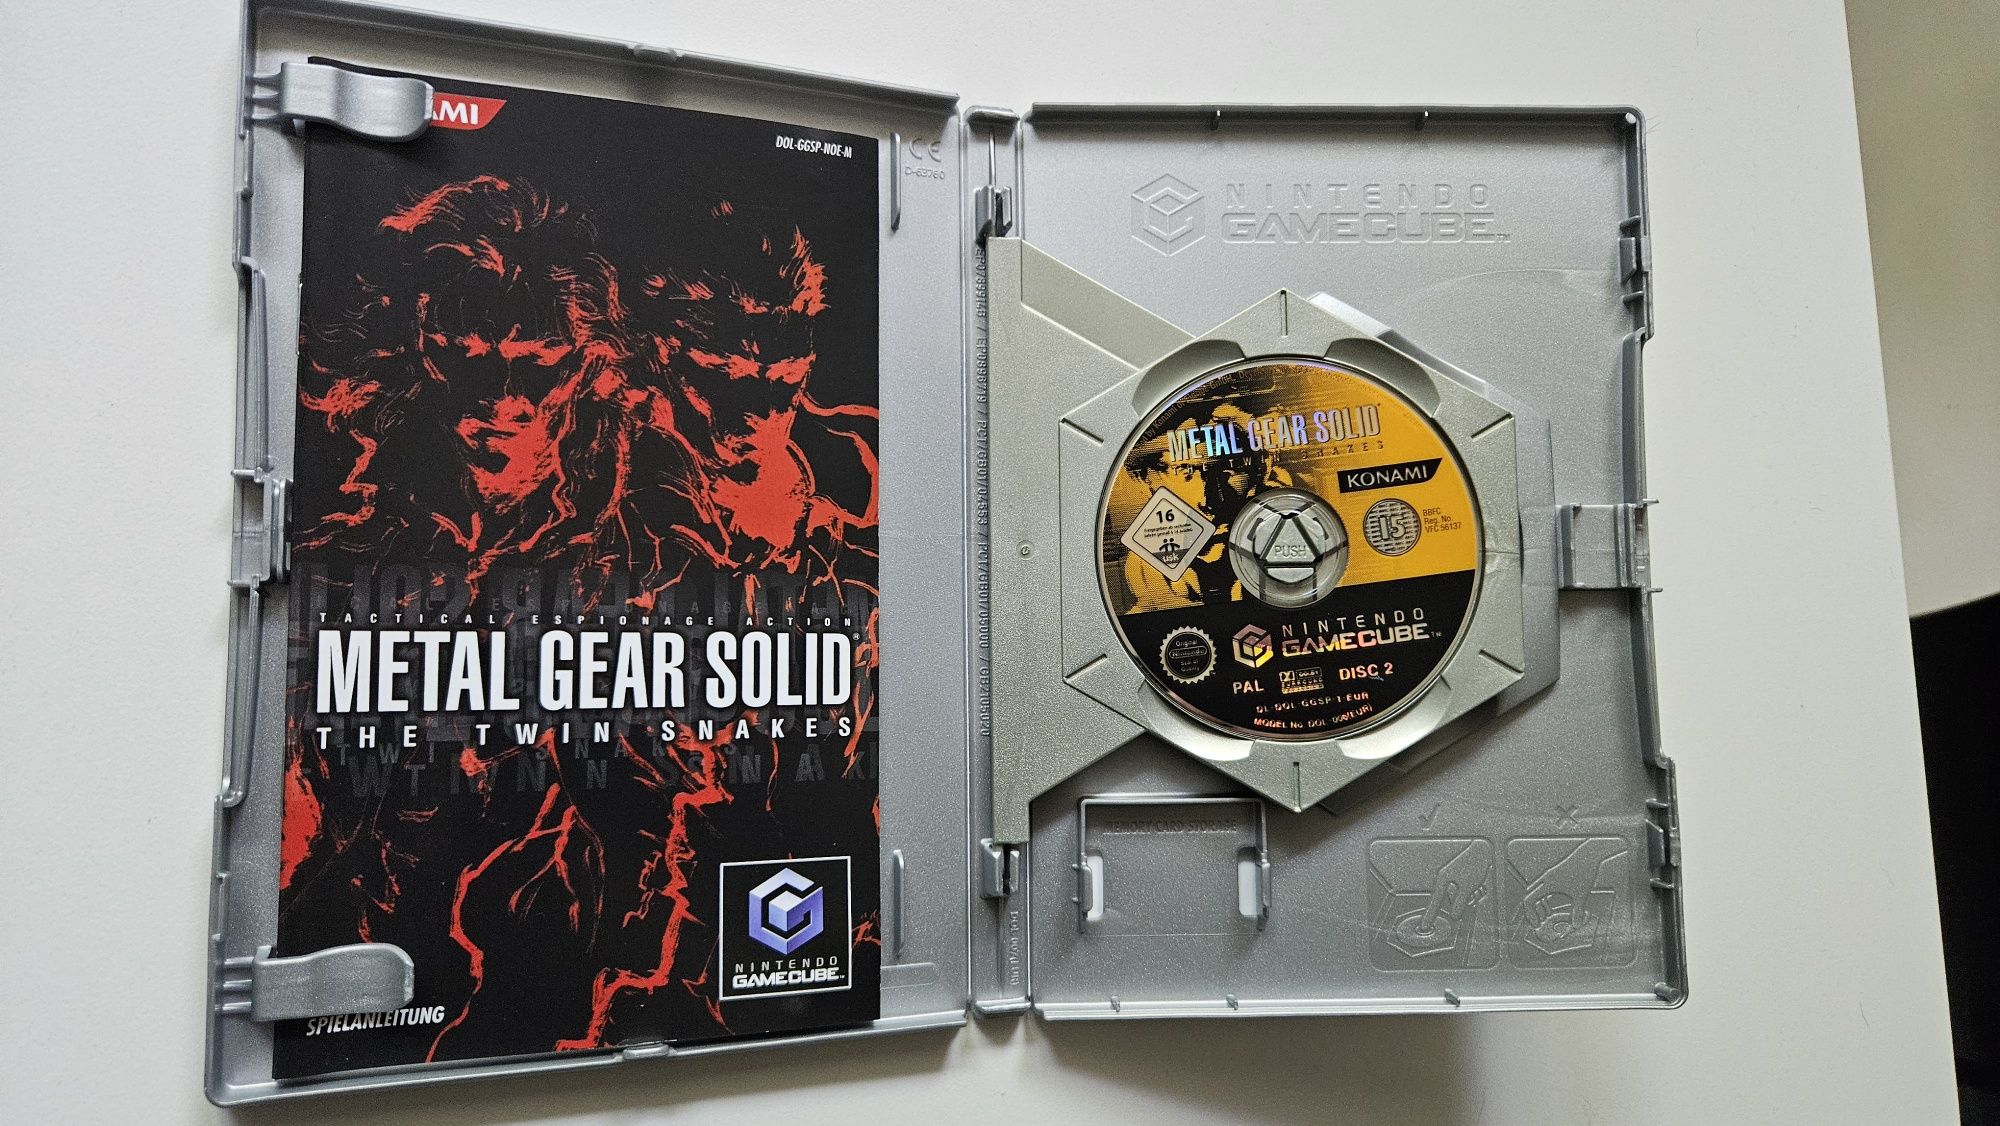 Metal Gear Solid The Twin Snakes Gamecube BDB